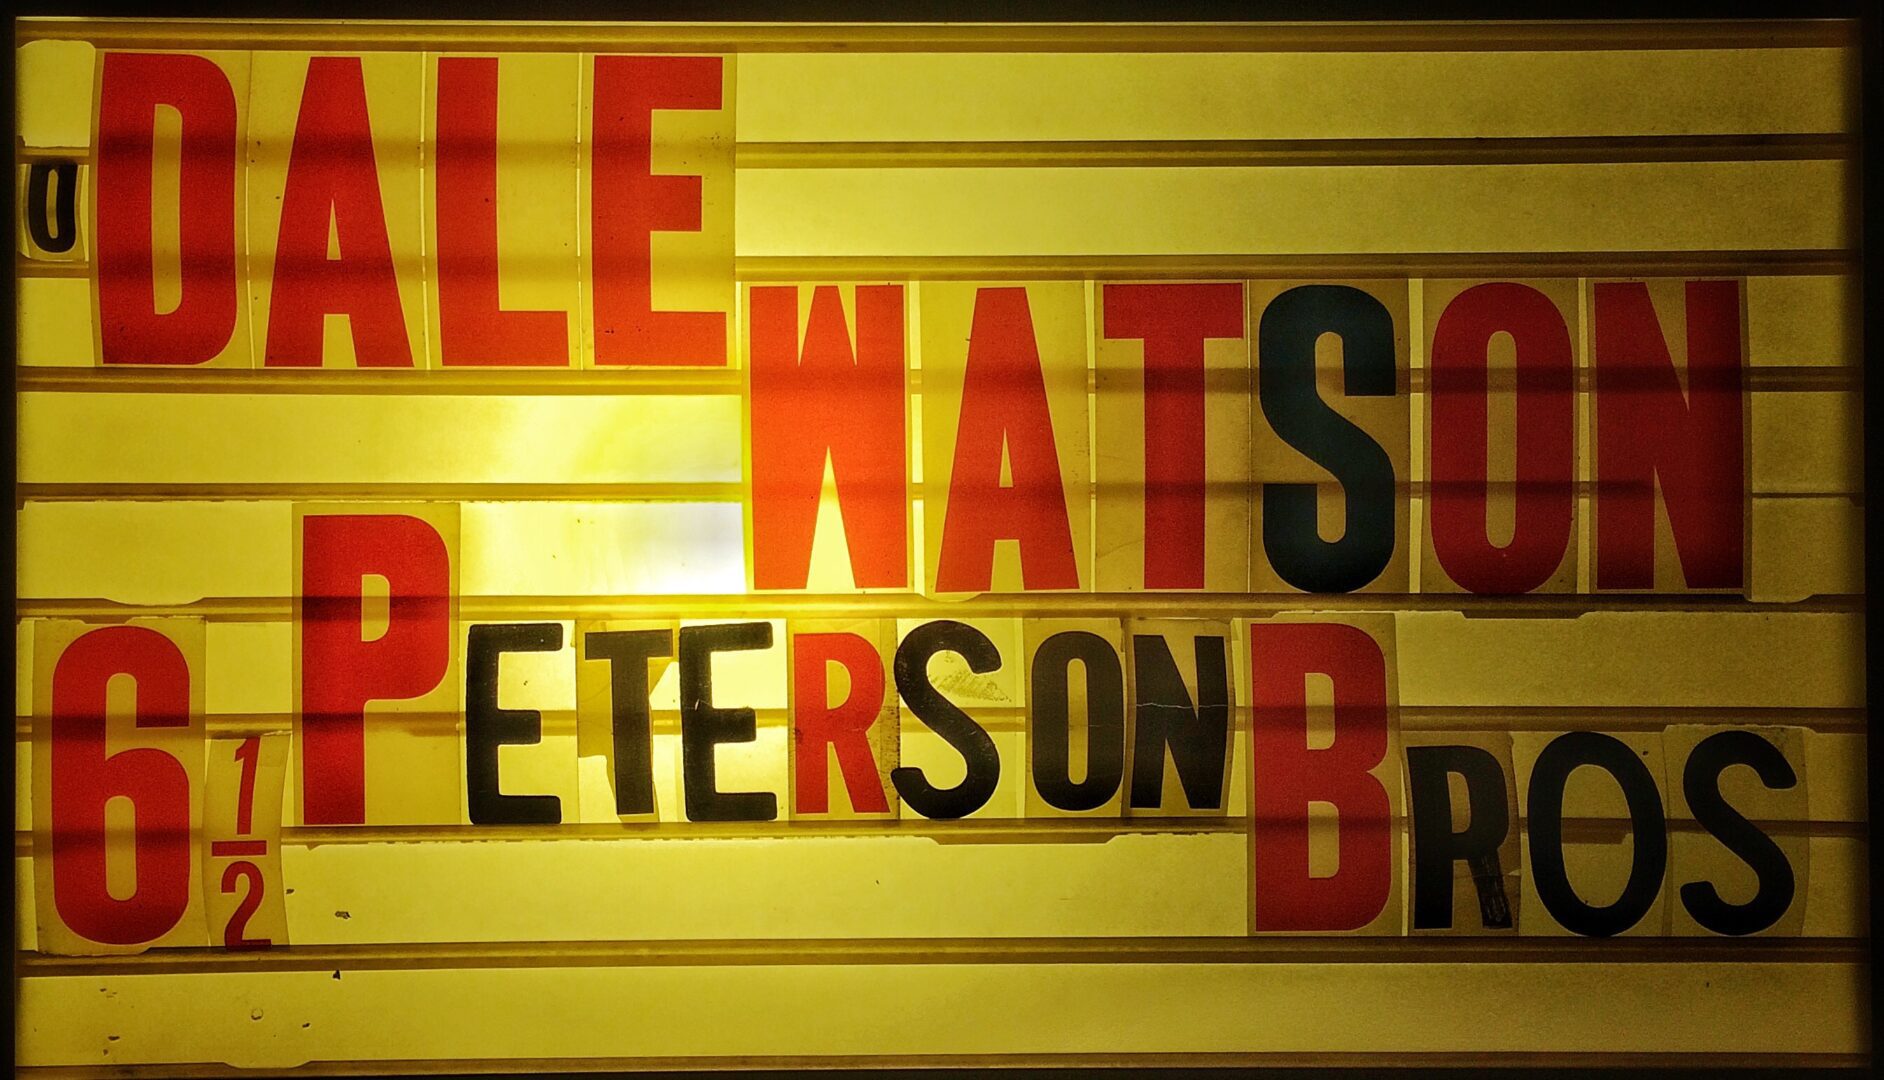 A sign that says dale watson 6 peterson bros.